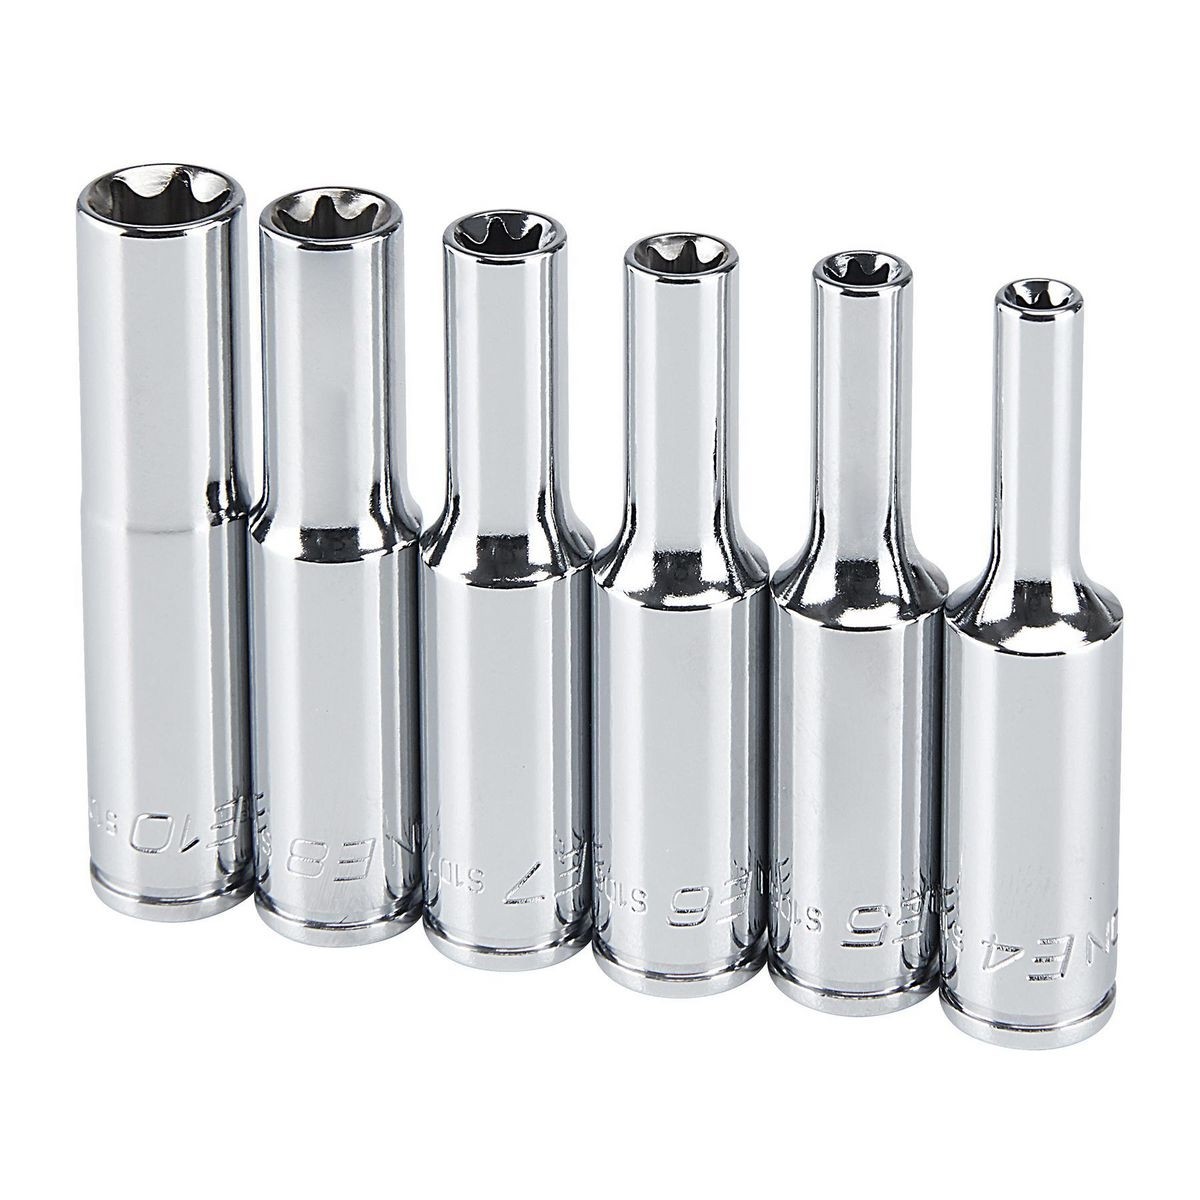 1/4 in. and 3/8 in. Drive SAE Professional Ball Hex Socket Set, 8